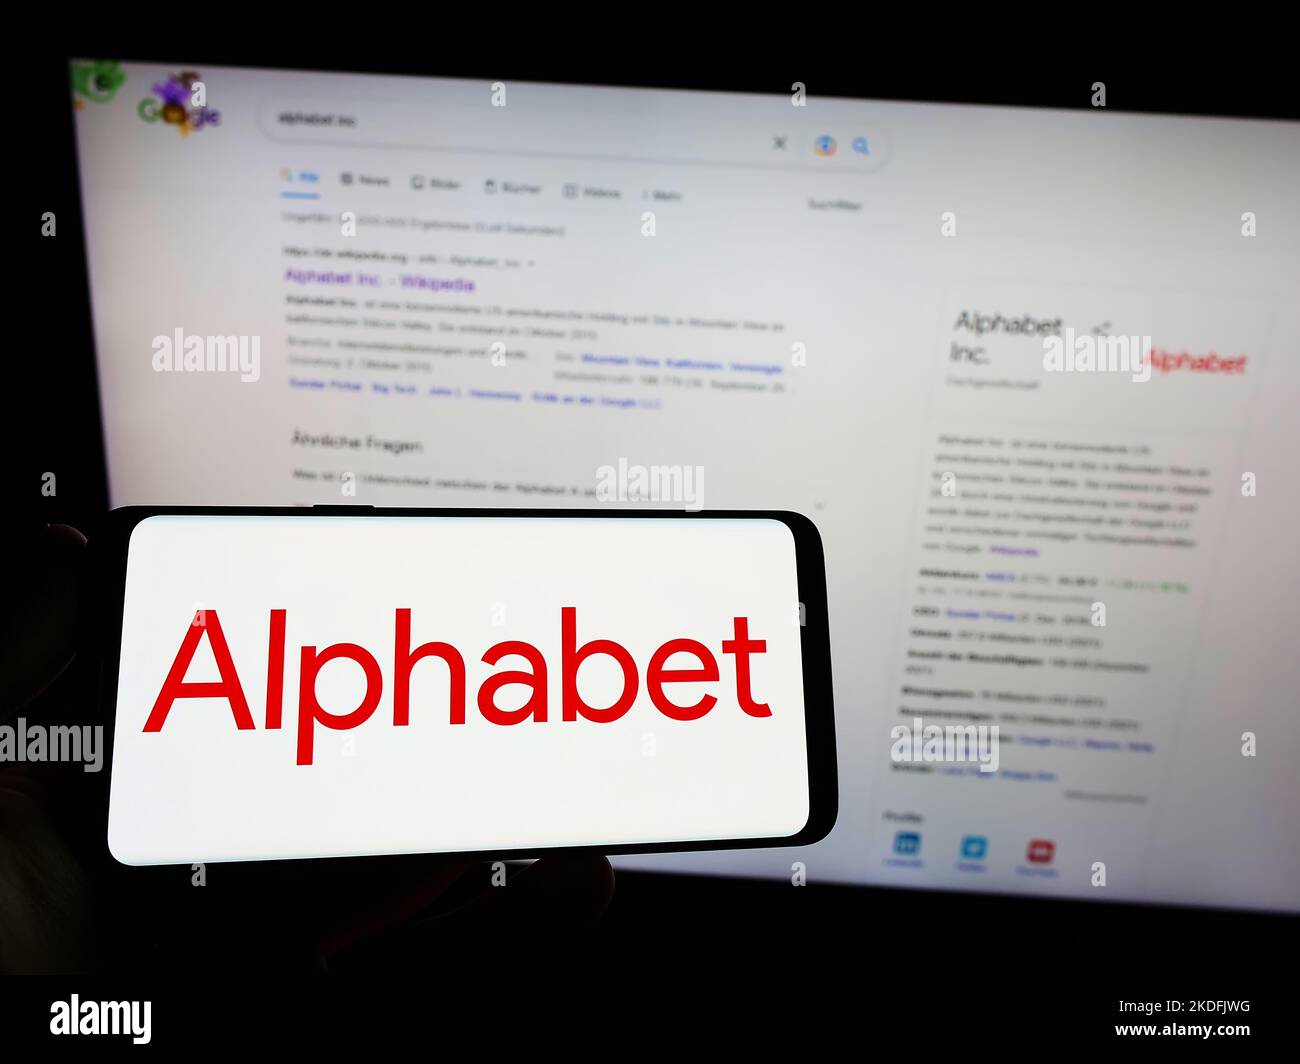 Person holding smartphone with logo of US holding company Alphabet Inc. (Google) on screen in front of website. Focus on phone display. Stock Photo